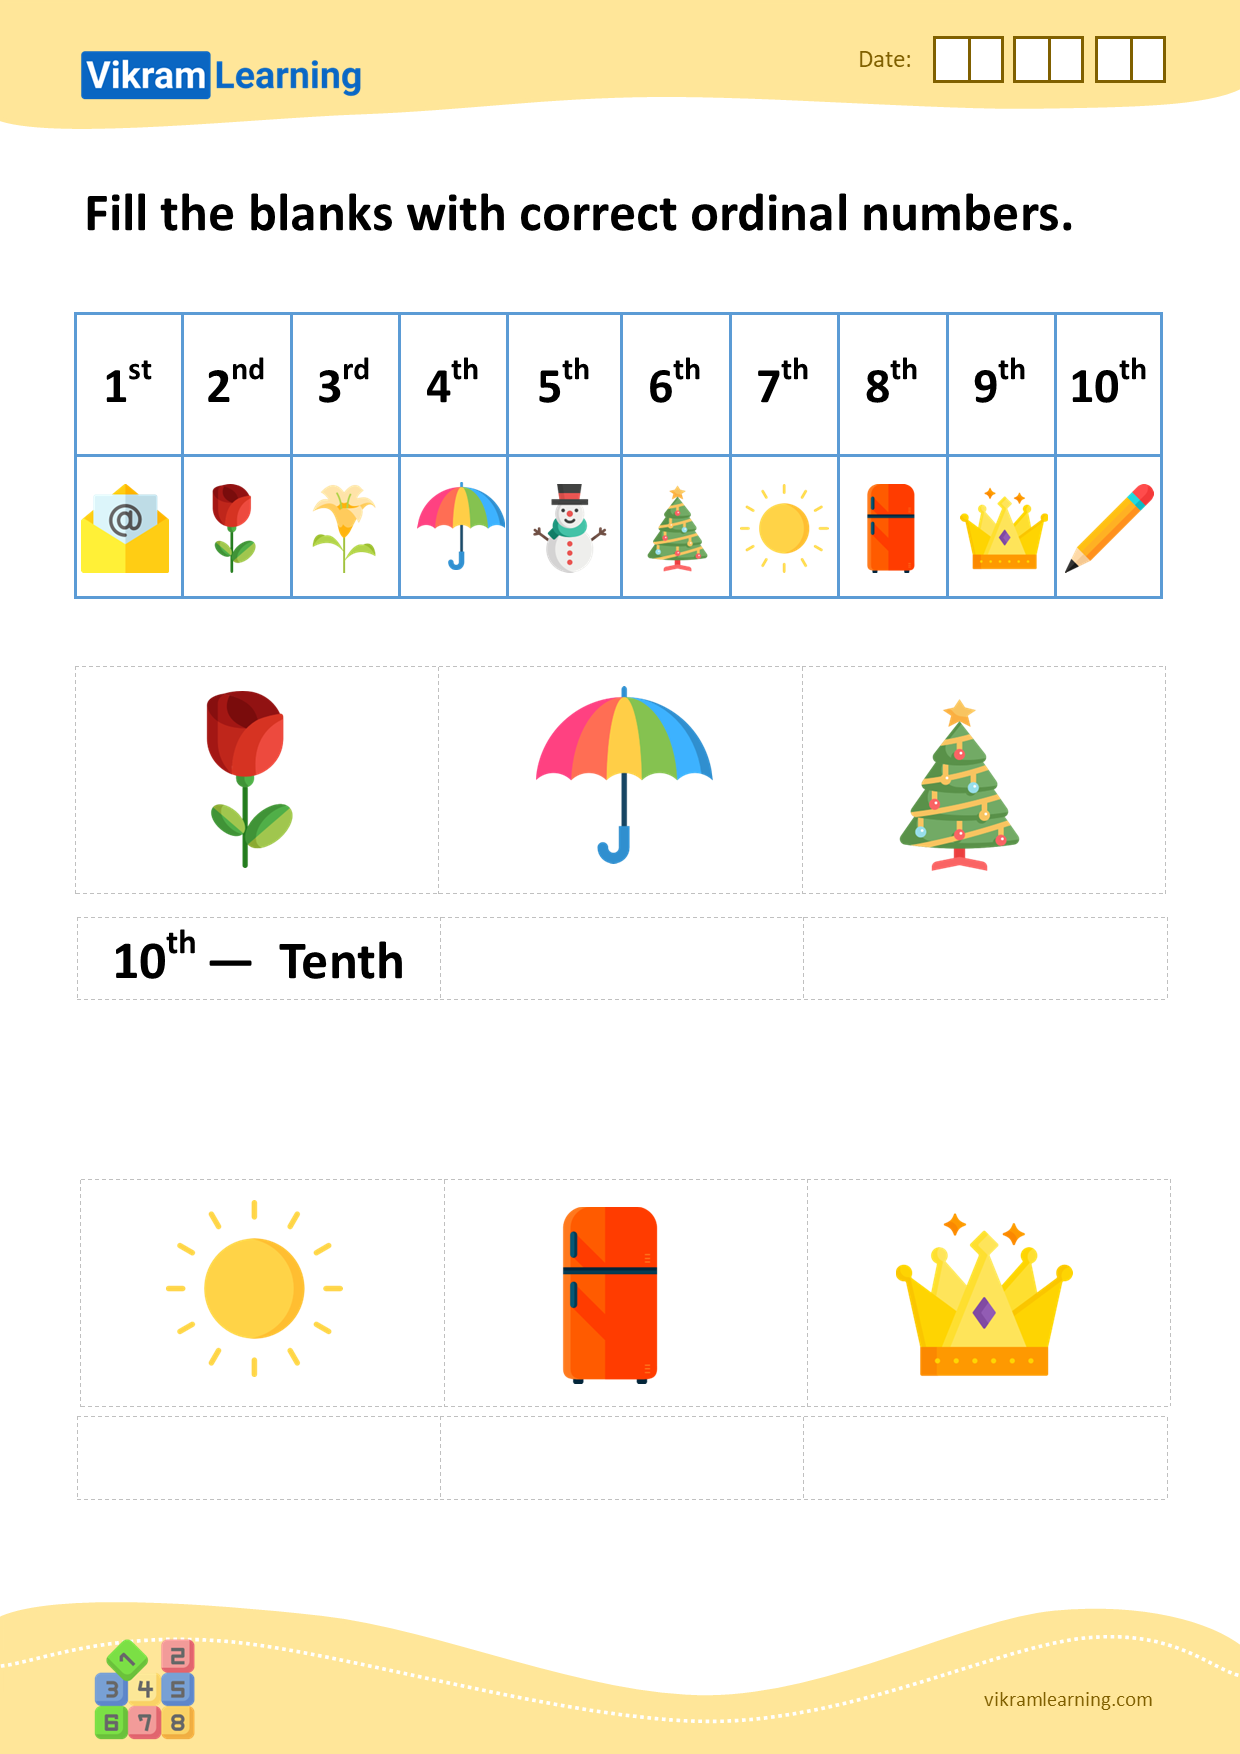 download-fill-the-blanks-with-correct-ordinal-numbers-worksheets-vikramlearning